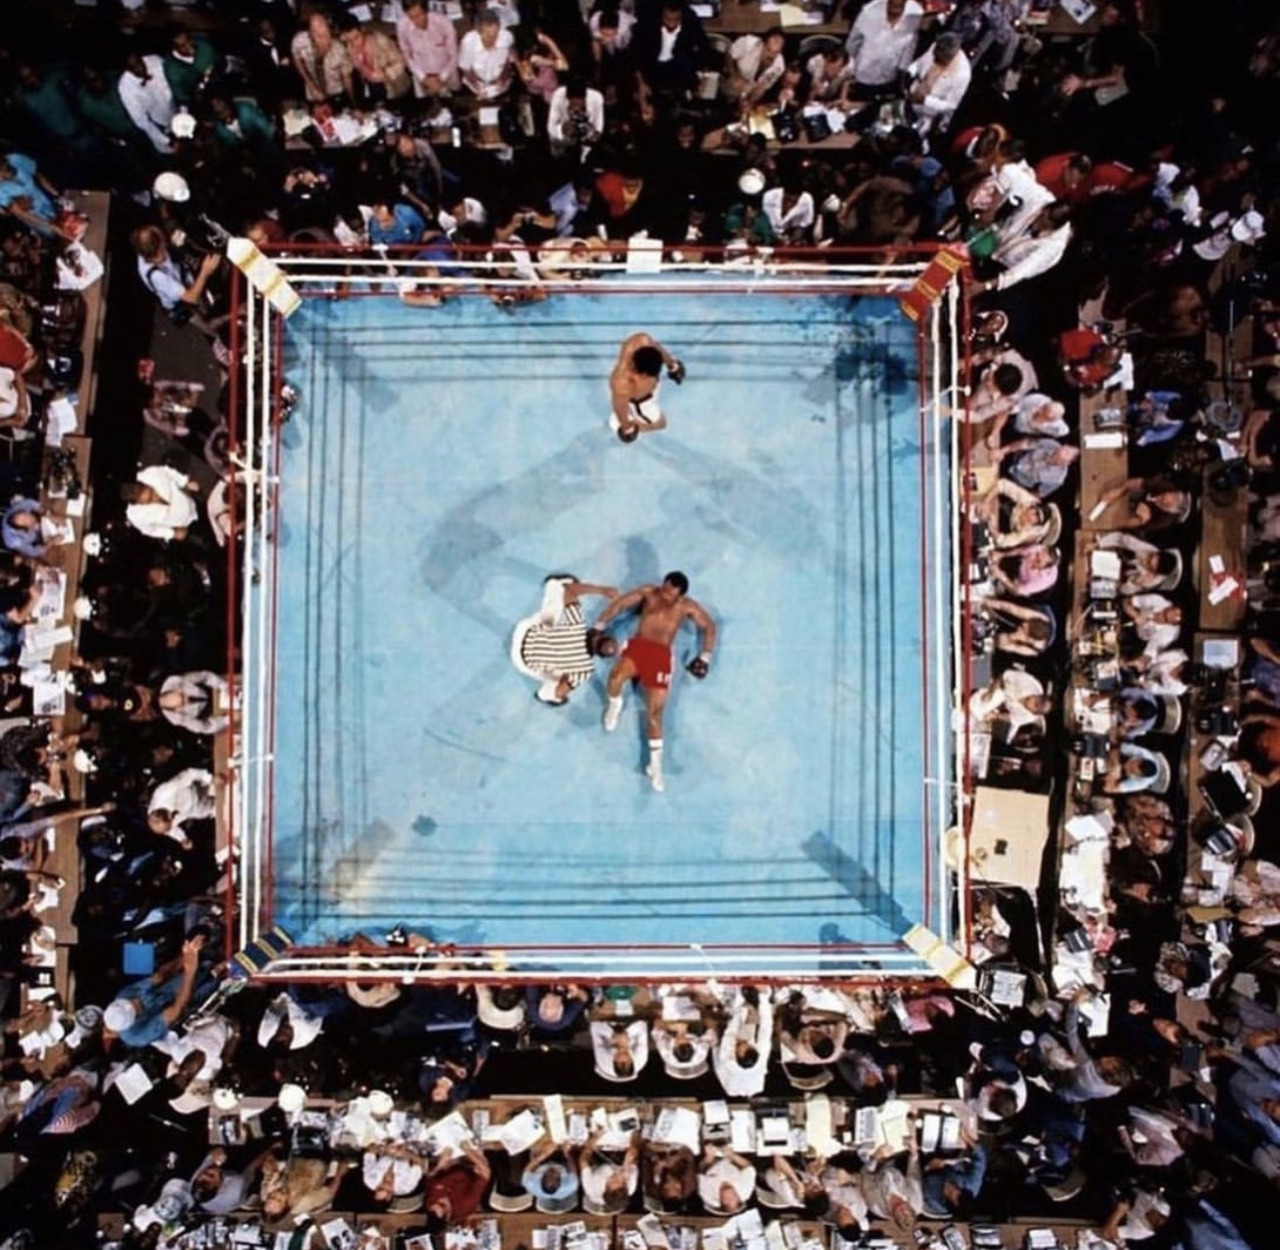 Porn ee7:Over head knockouts from Muhammad Ali photos